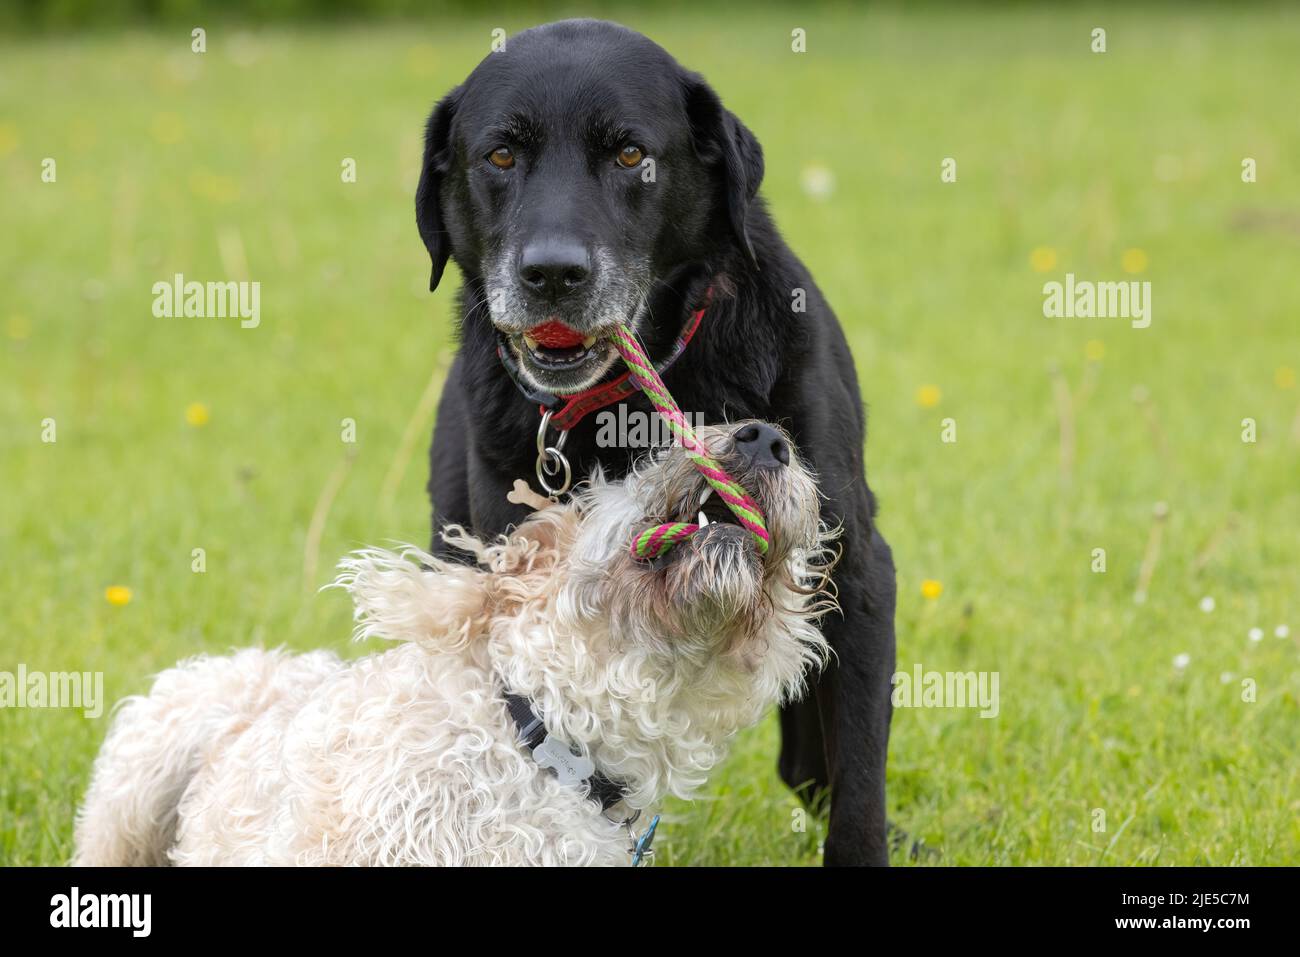 Black Labrador with red toy in the mouth and white labradoodle trying to grab the toy at the dog park Stock Photo